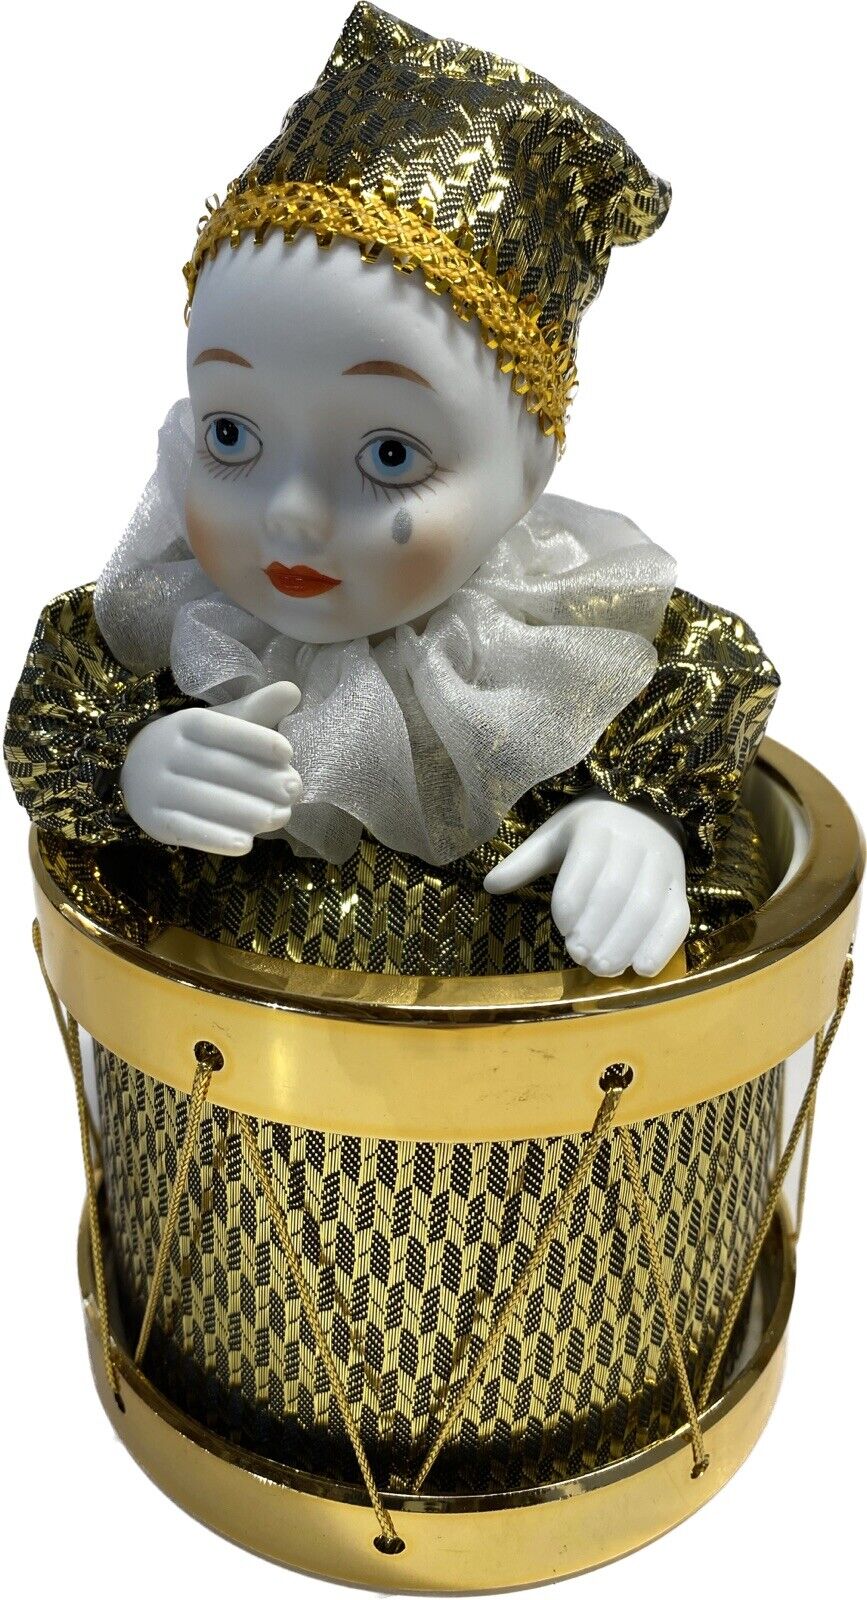 Vintage Westland Porcelain Musical Moving Clown Doll in Drum w Box Gold